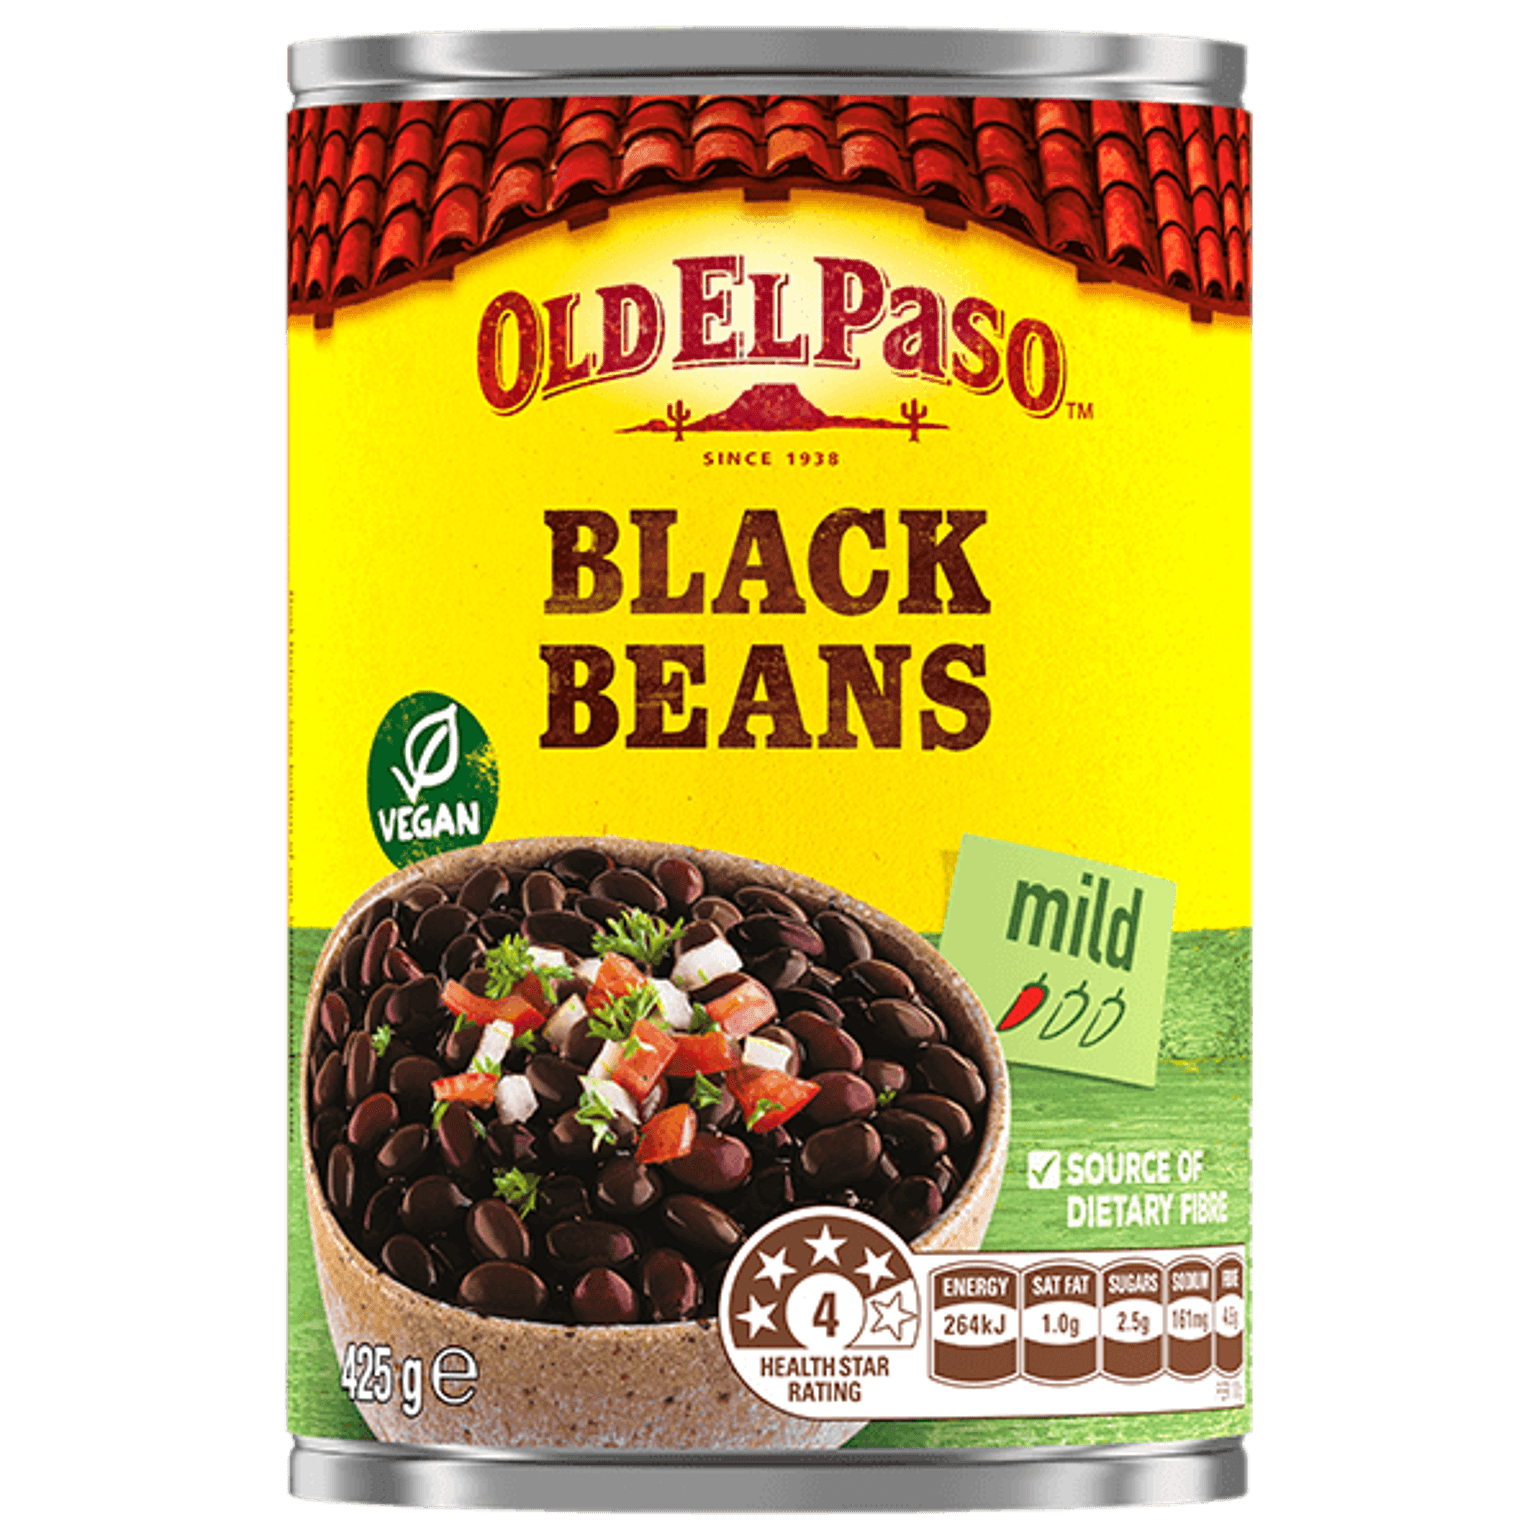 a can of Old El Paso's mild black beans (425g)